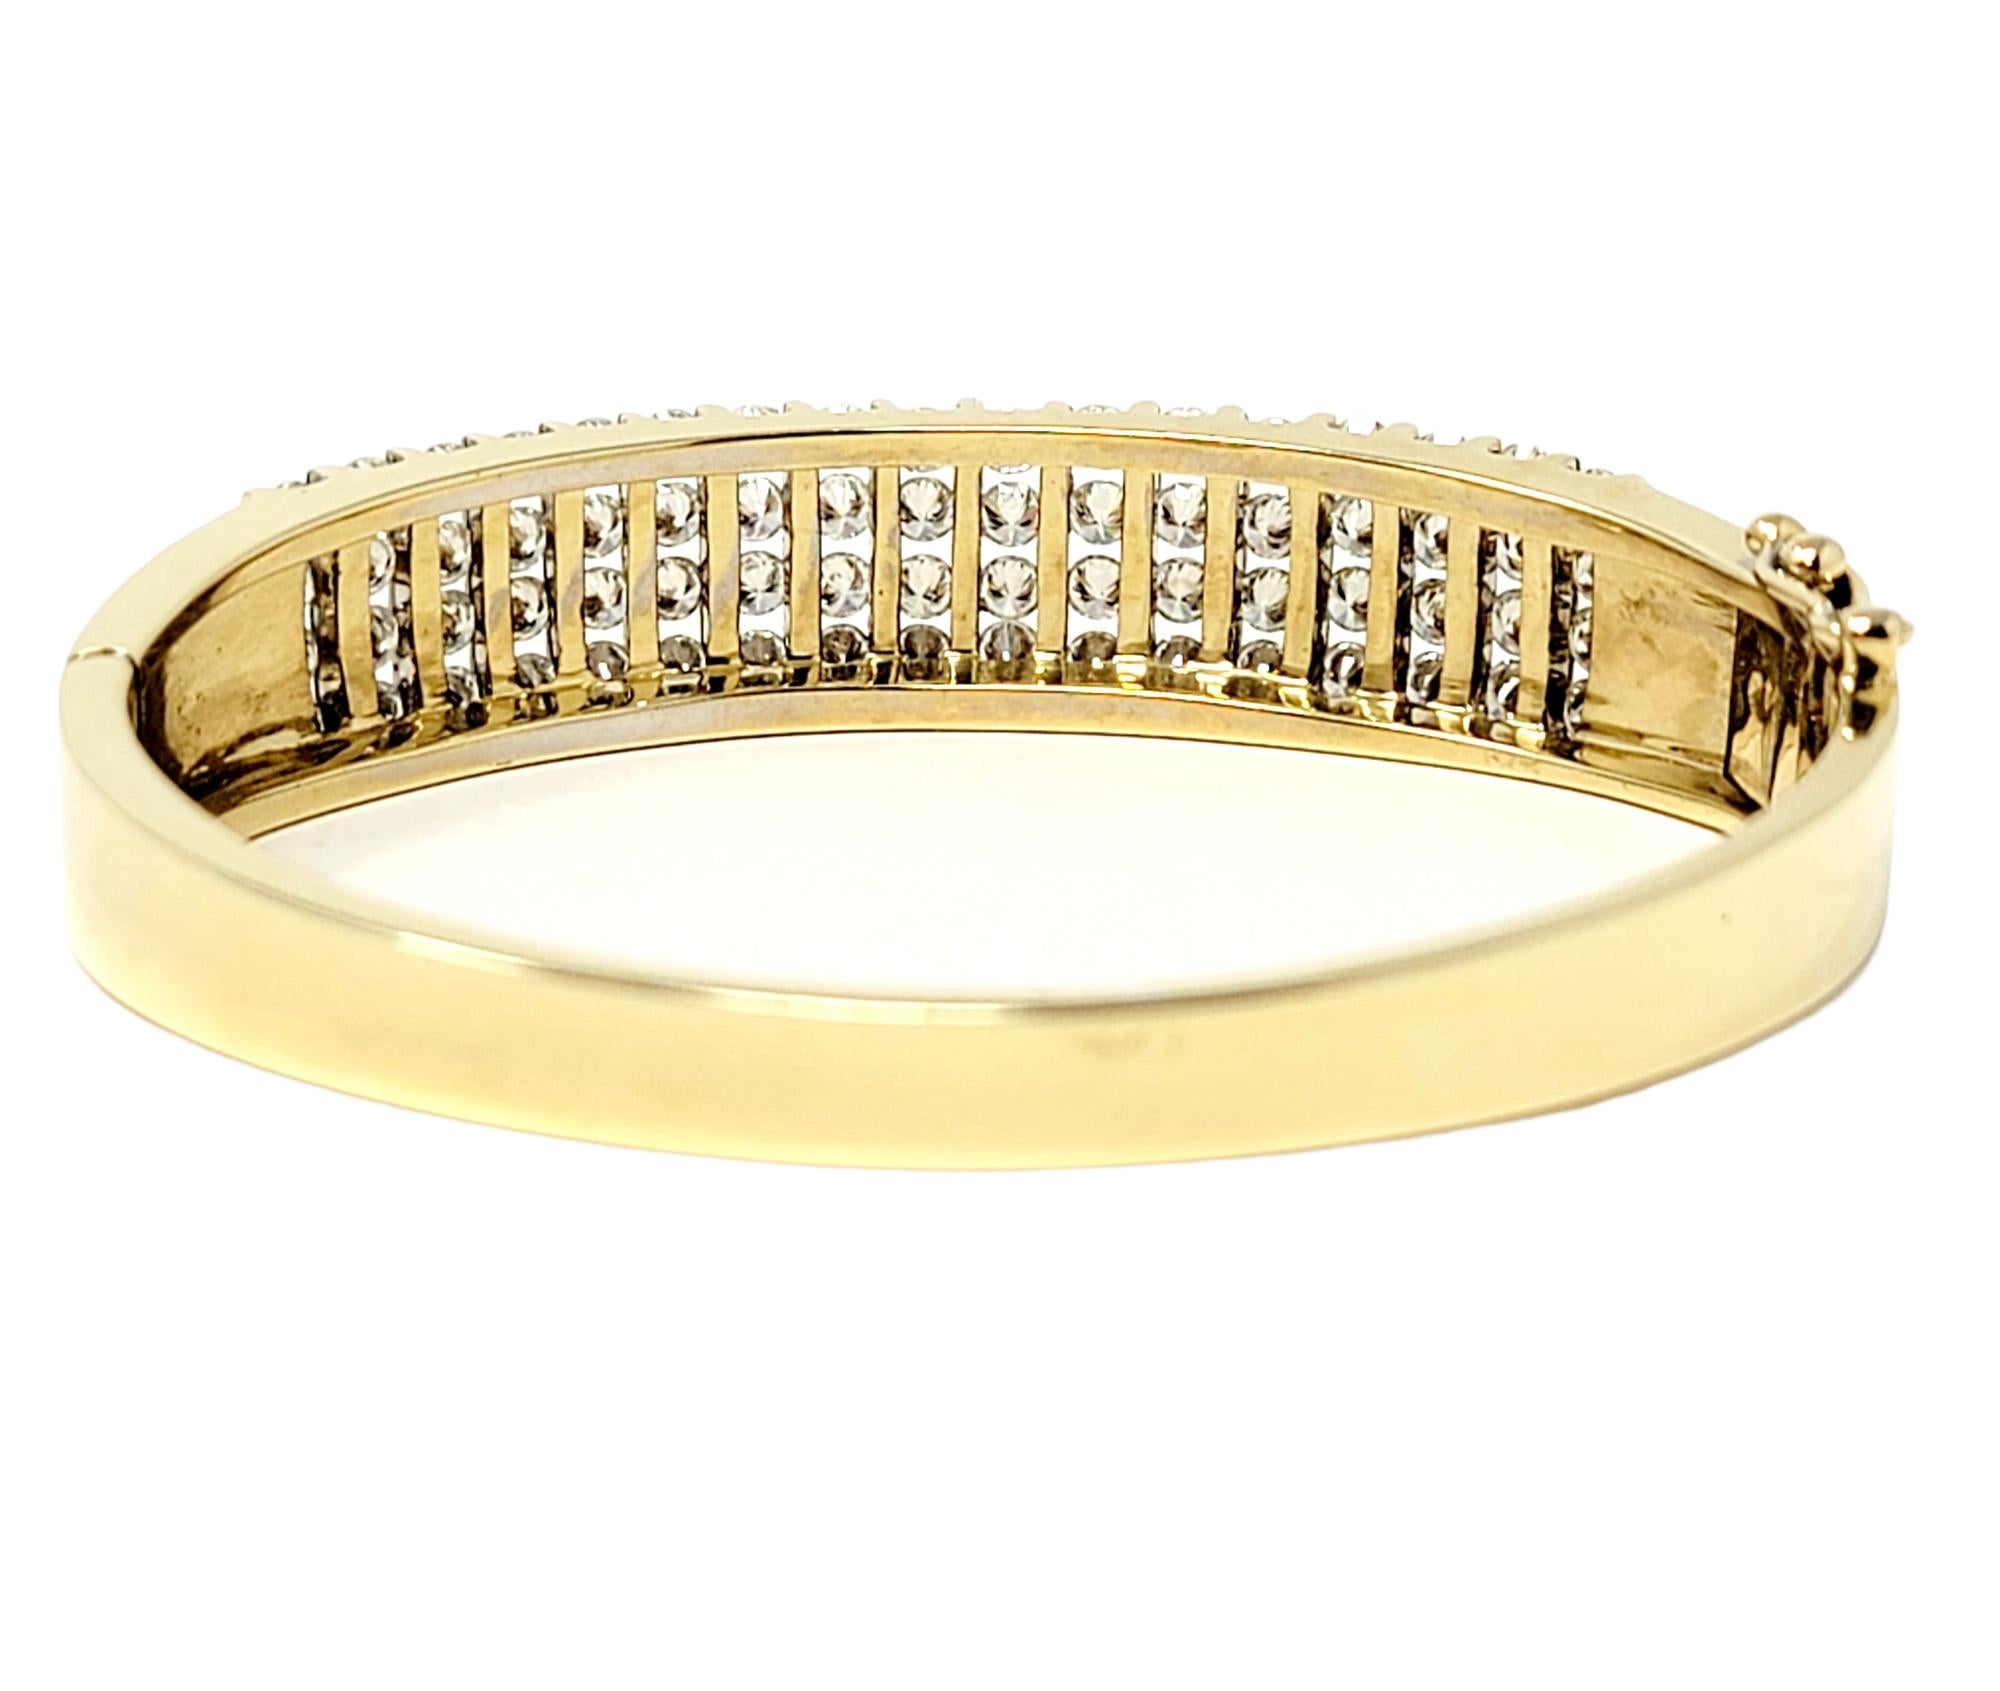 Channel Set Round Diamond Bangle Bracelet 5.50 Carats Total 14 Karat Yellow Gold In Good Condition For Sale In Scottsdale, AZ